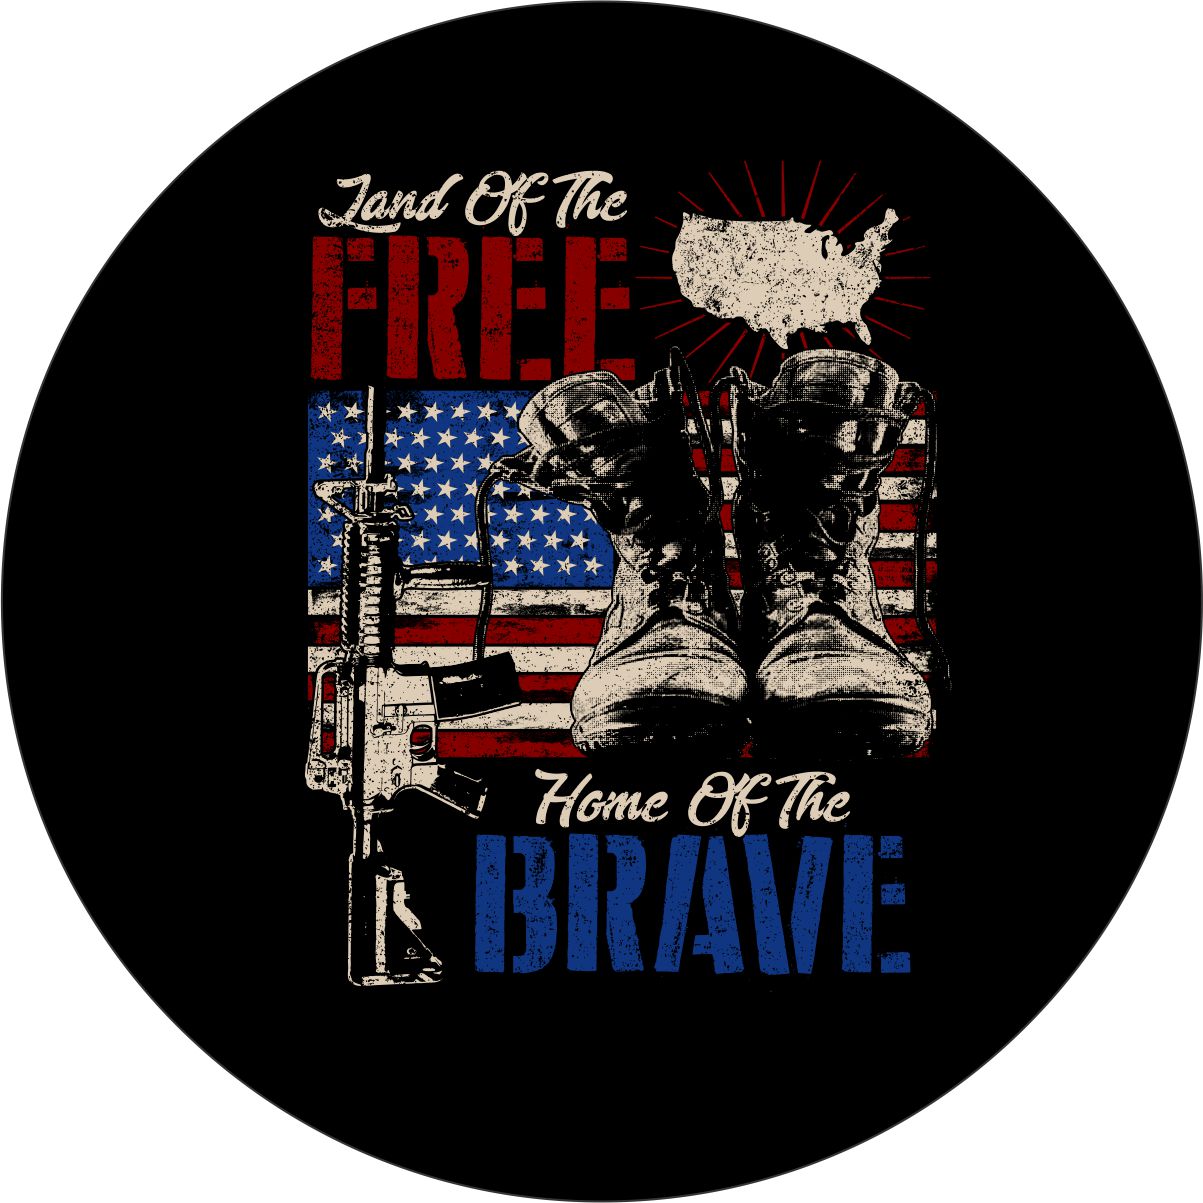 Patriotic spare tire cover design with images of a military rifle, boots, and a silhouette of the United States on top of an American flag and the quote, "land of the free home of the brave"